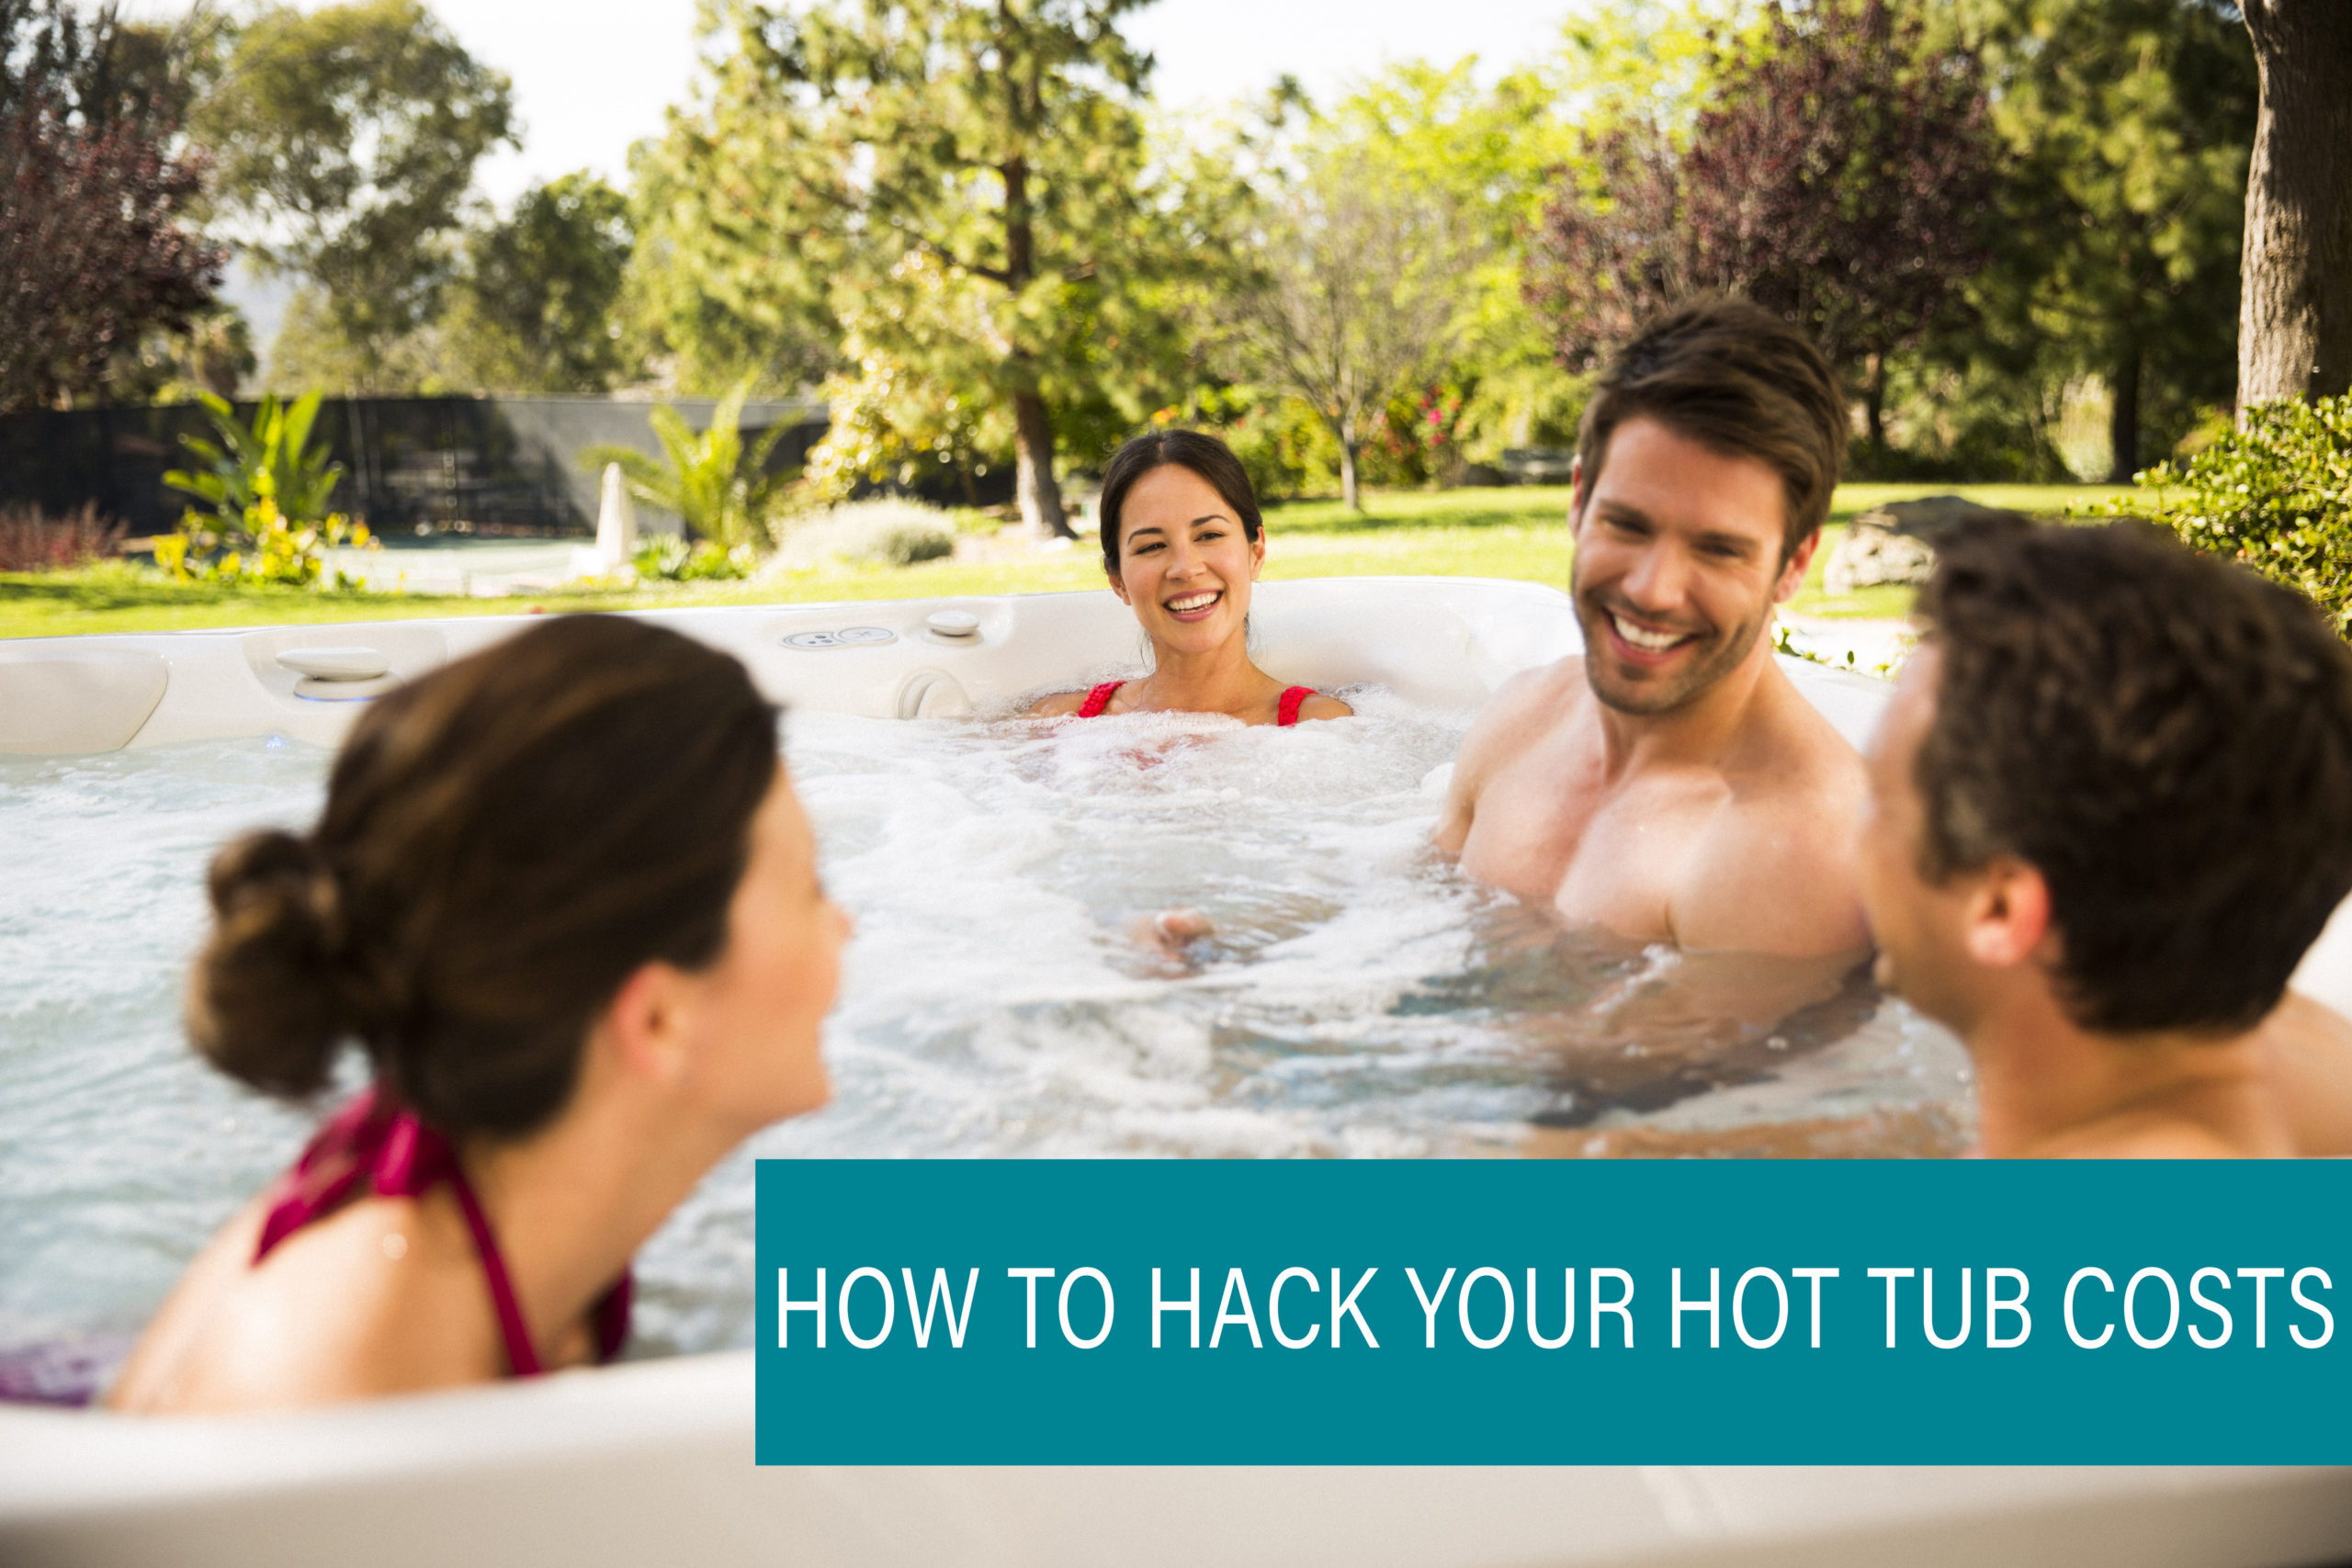 How to hack your hot tub costs